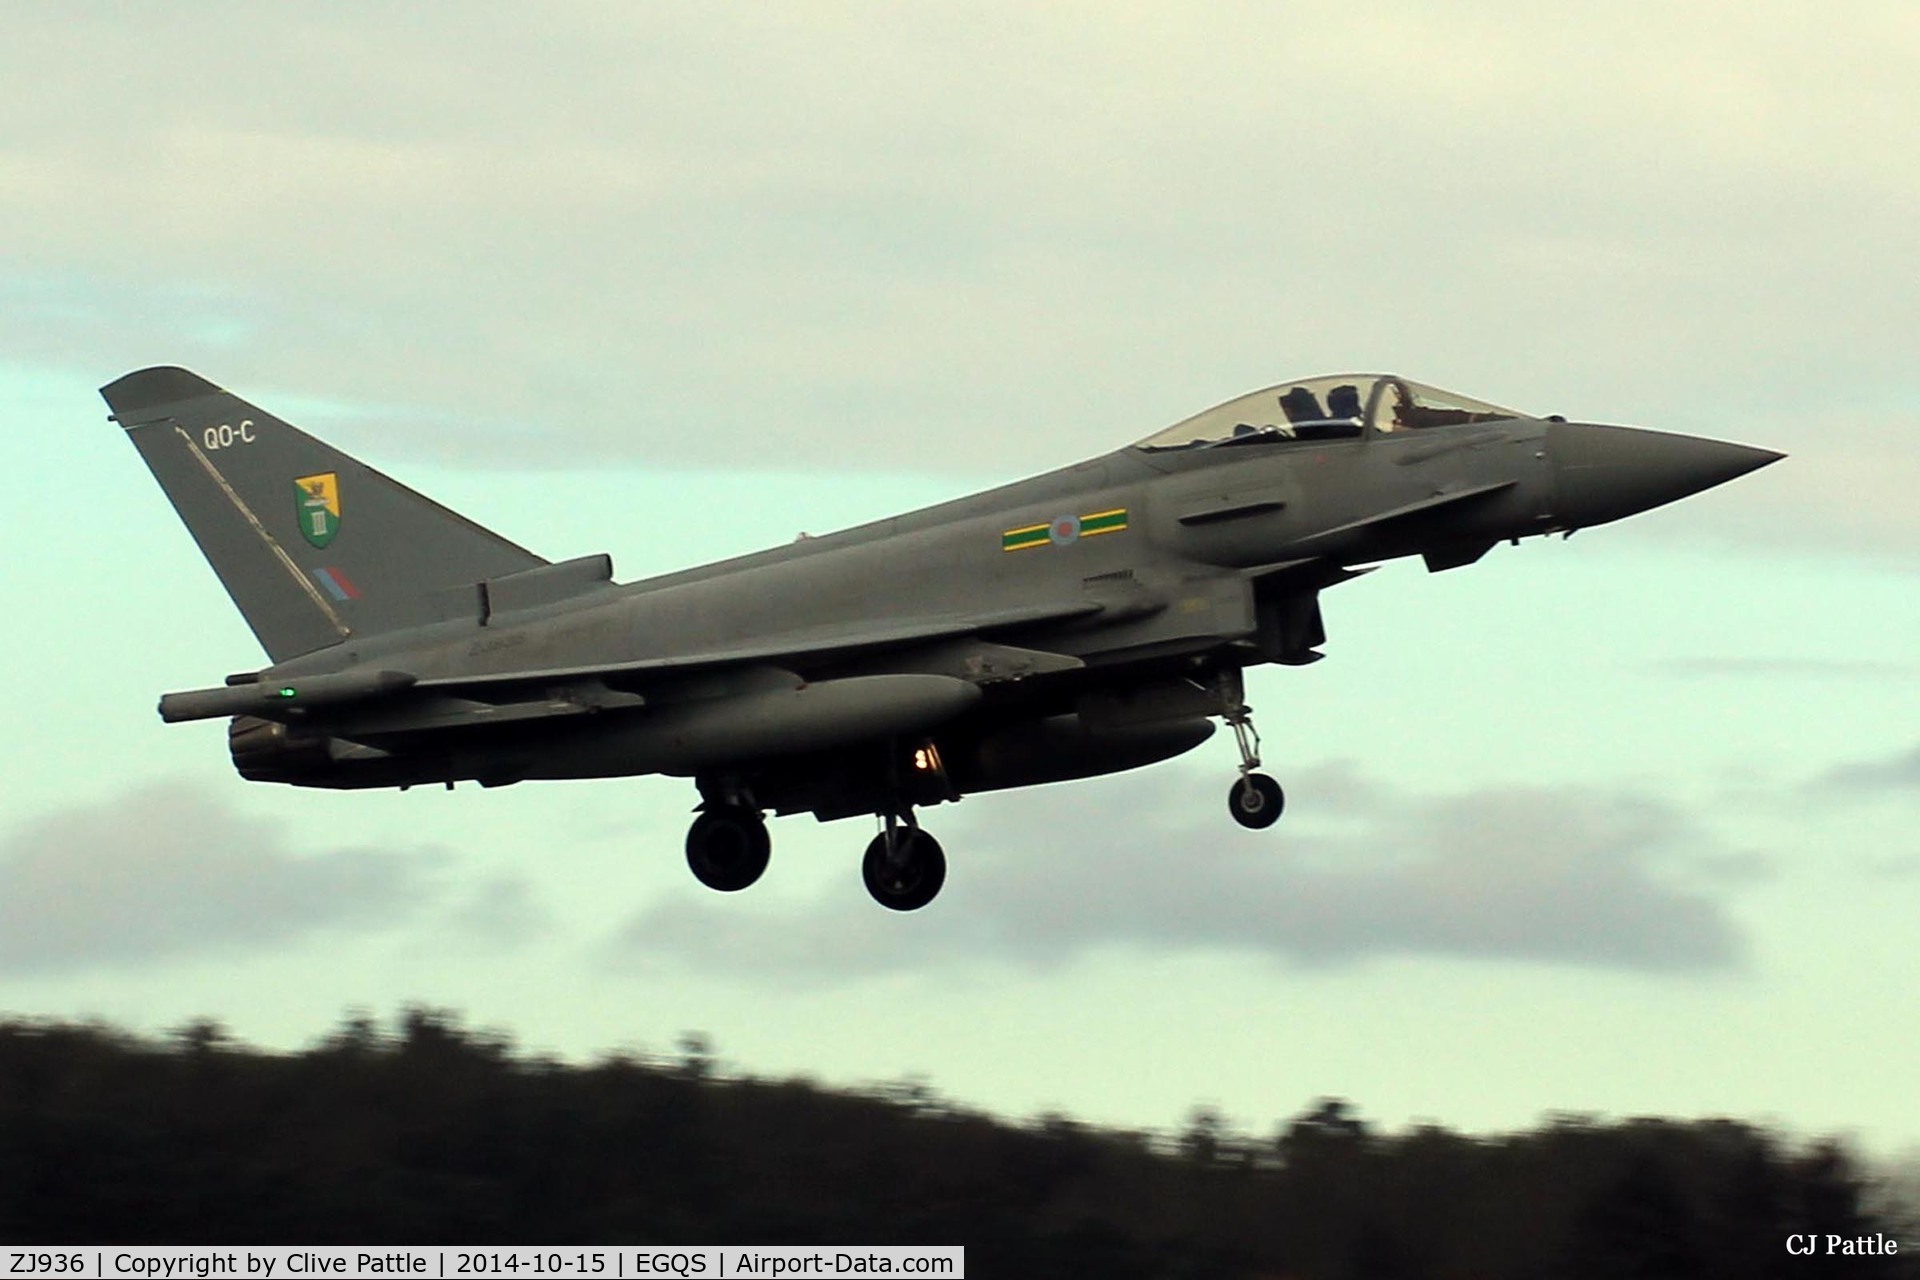 ZJ936, 2007 Eurofighter EF-2000 Typhoon FGR4 C/N 0119/BS027, seen on finals at RAF Lossiemouth, coded 'QO-C' with 3 Sqn visiting from RAF Coningsby for participation in Exercise Joint Warrior 14-2